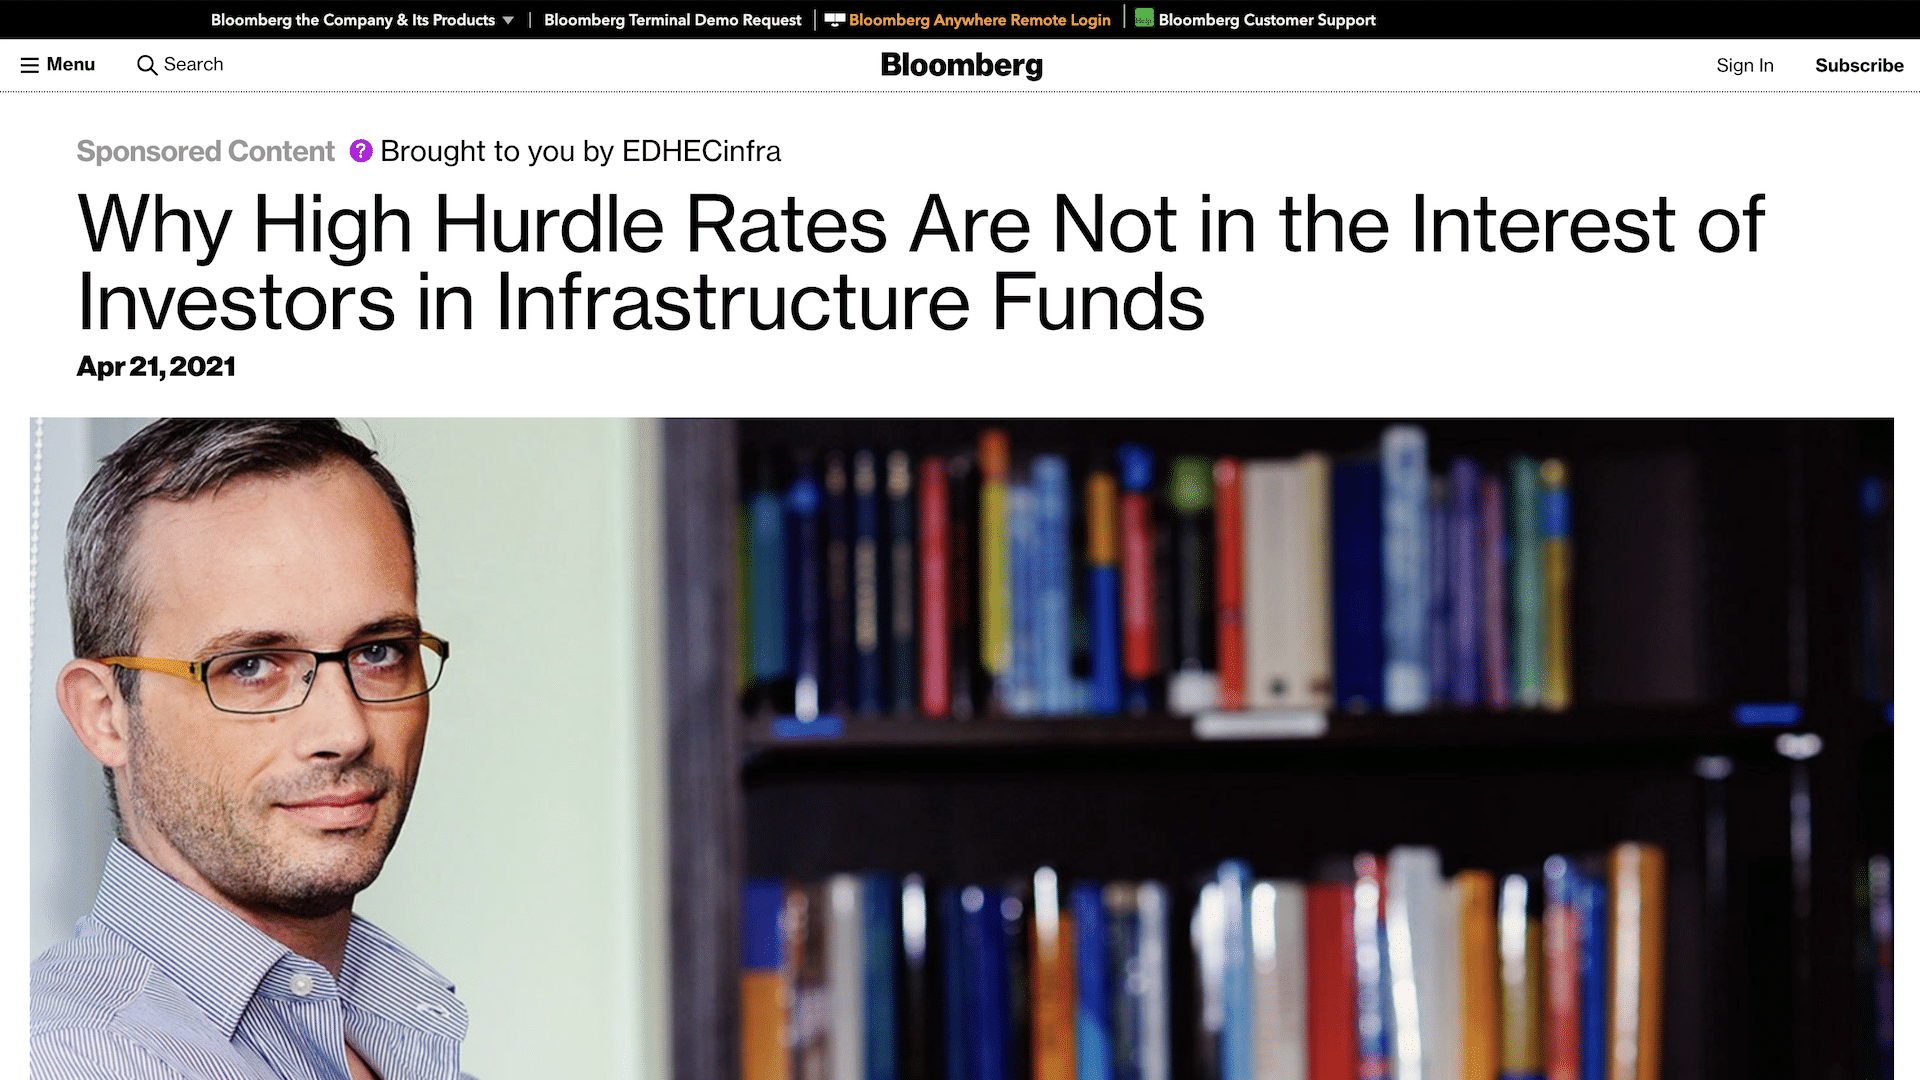 Bloomberg: Hurdles not set in the interest of investors in funds